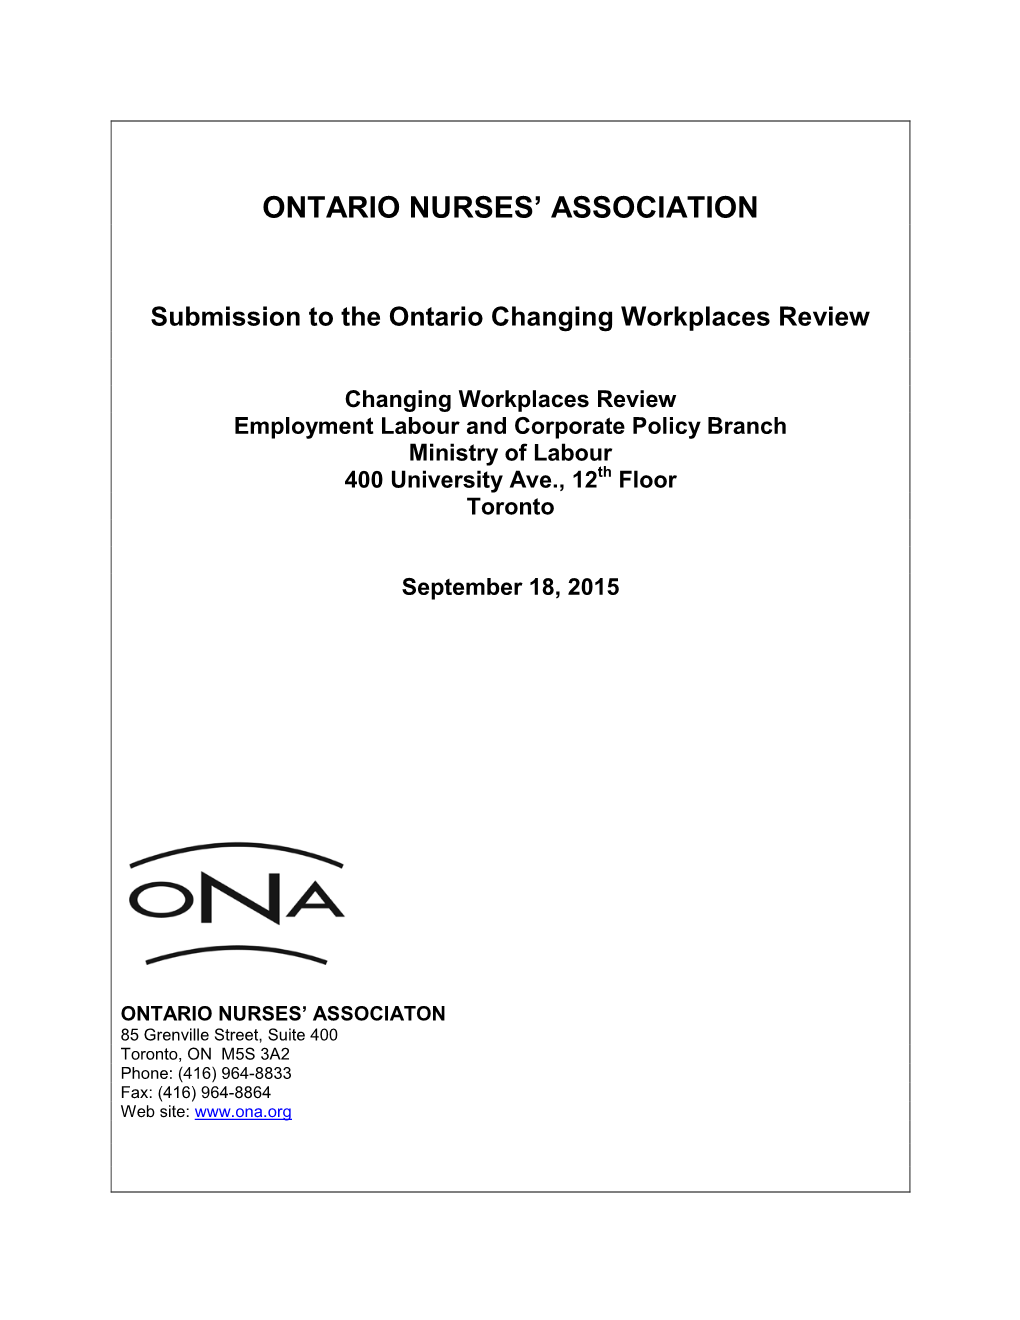 Submission to the Ontario Changing Workplace Review